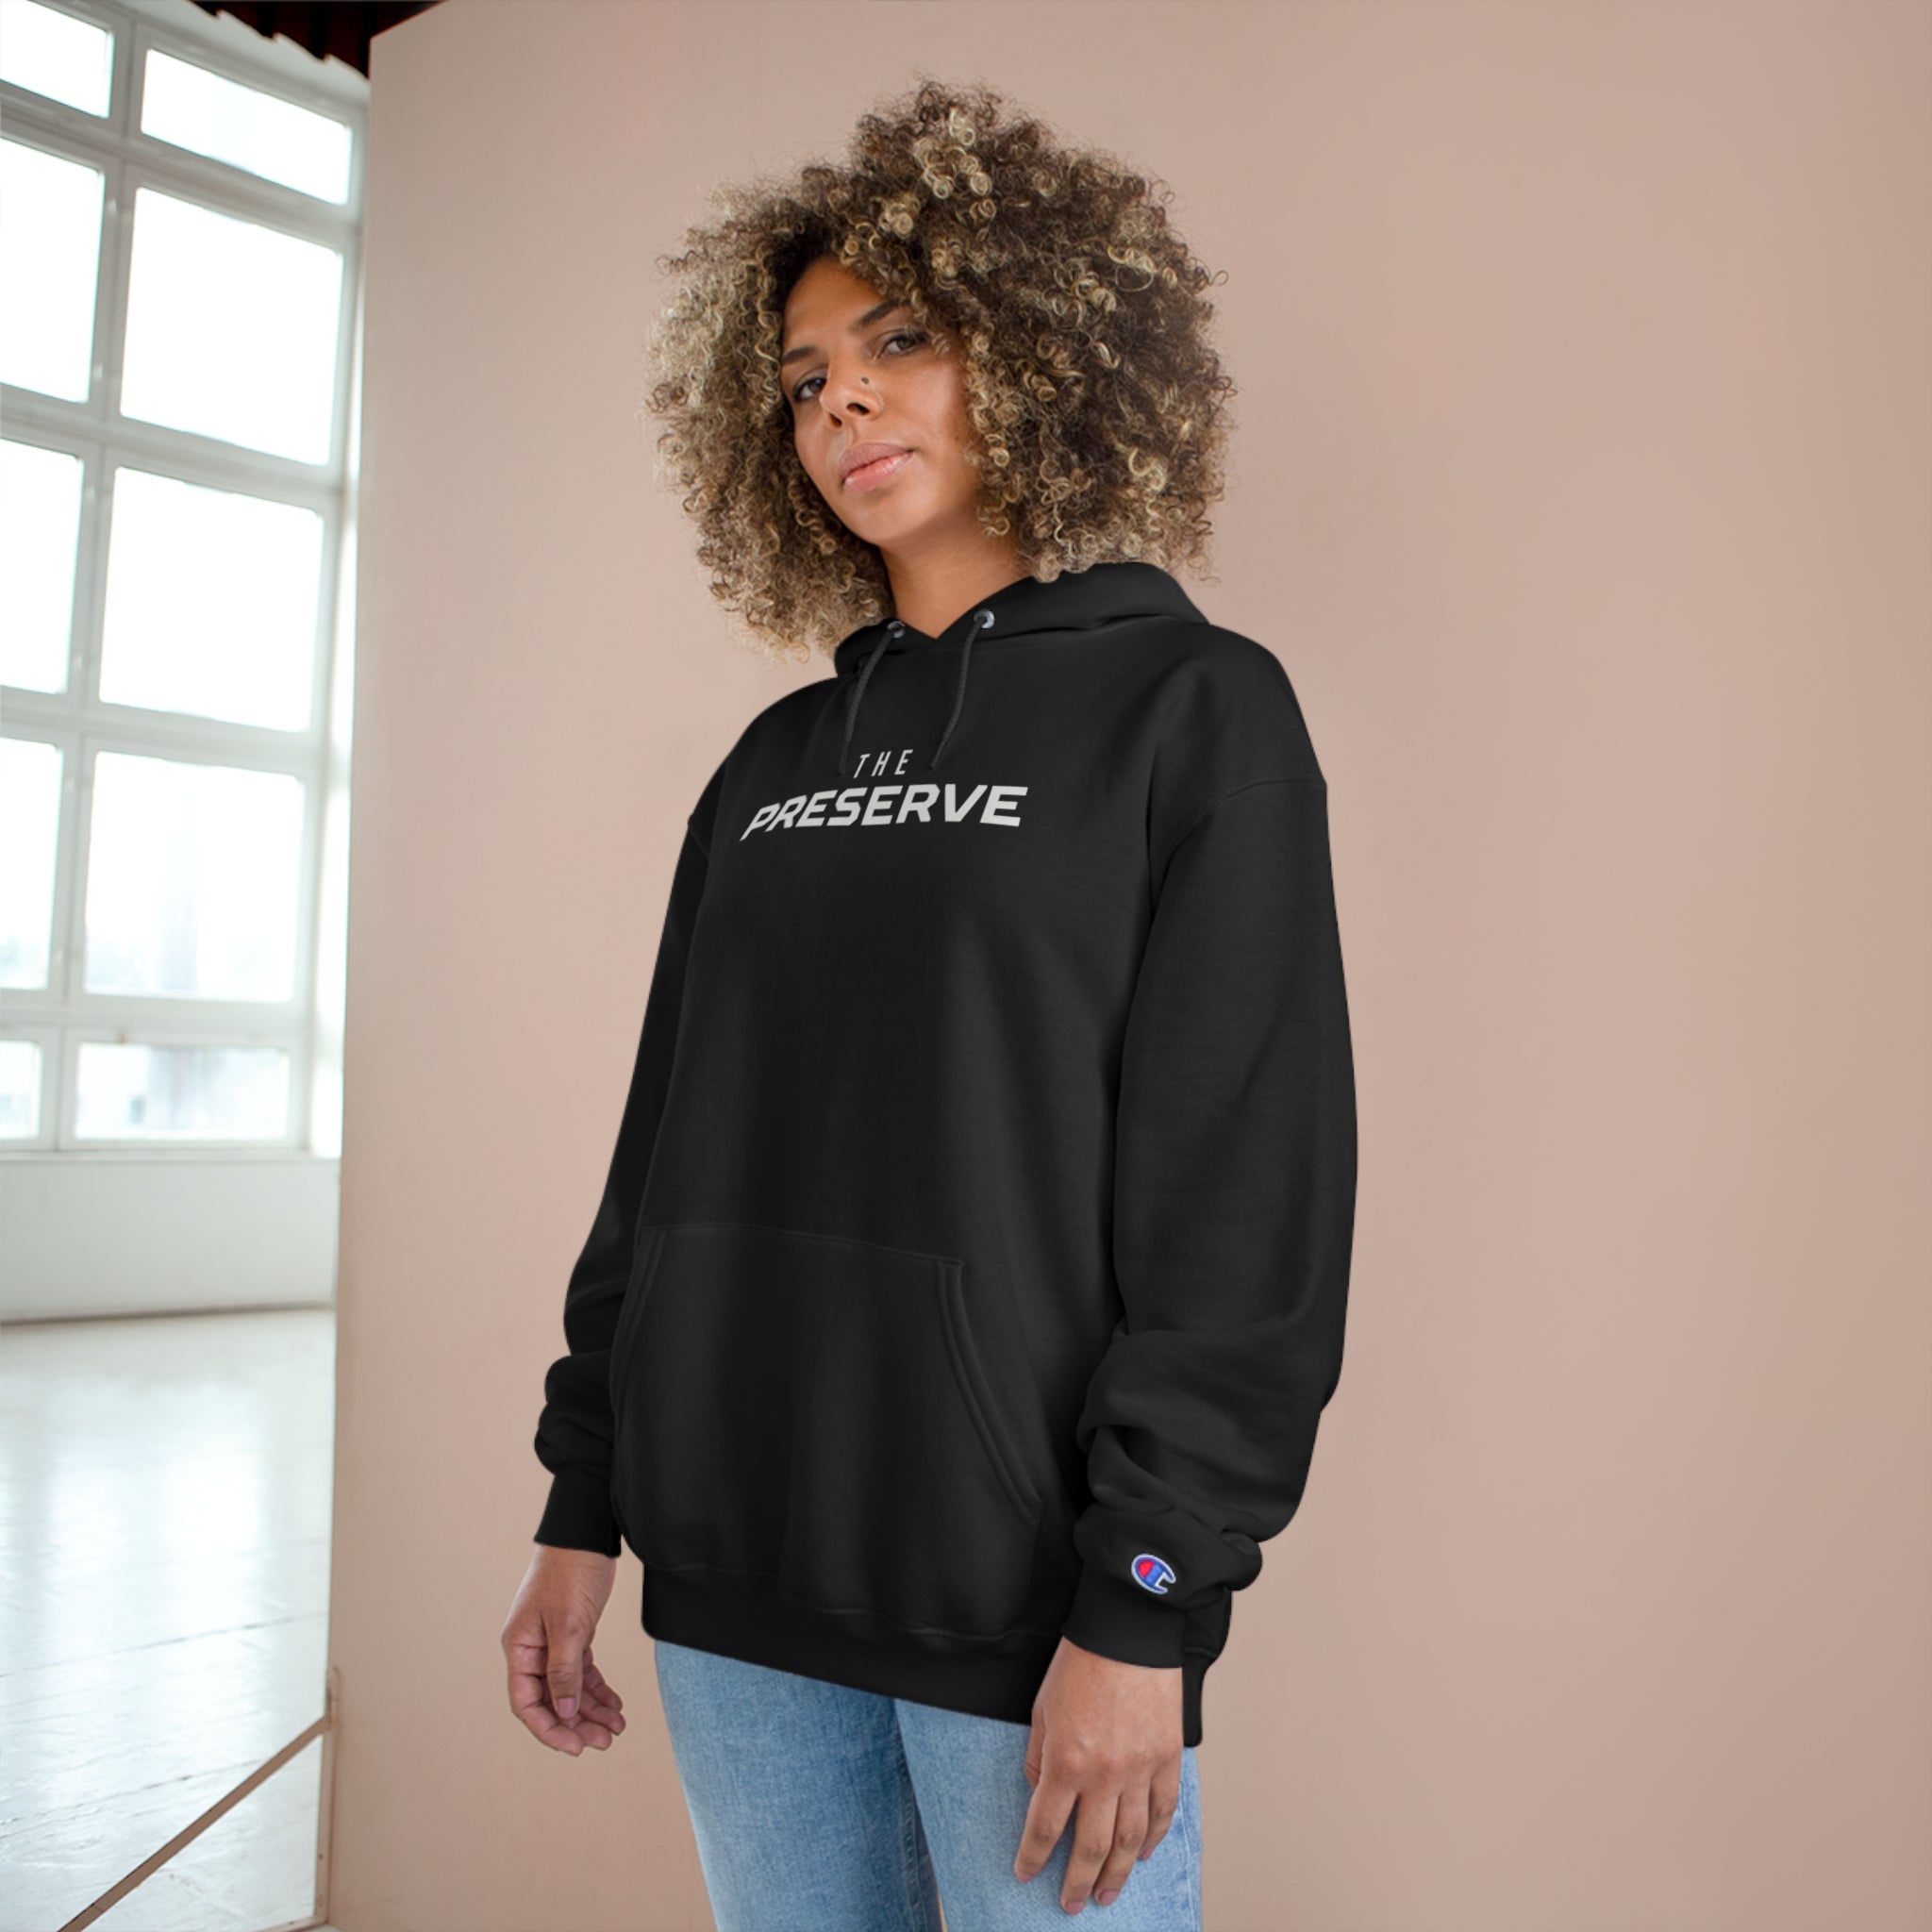 The Preserve Fundraiser Shield Champion Hoodie